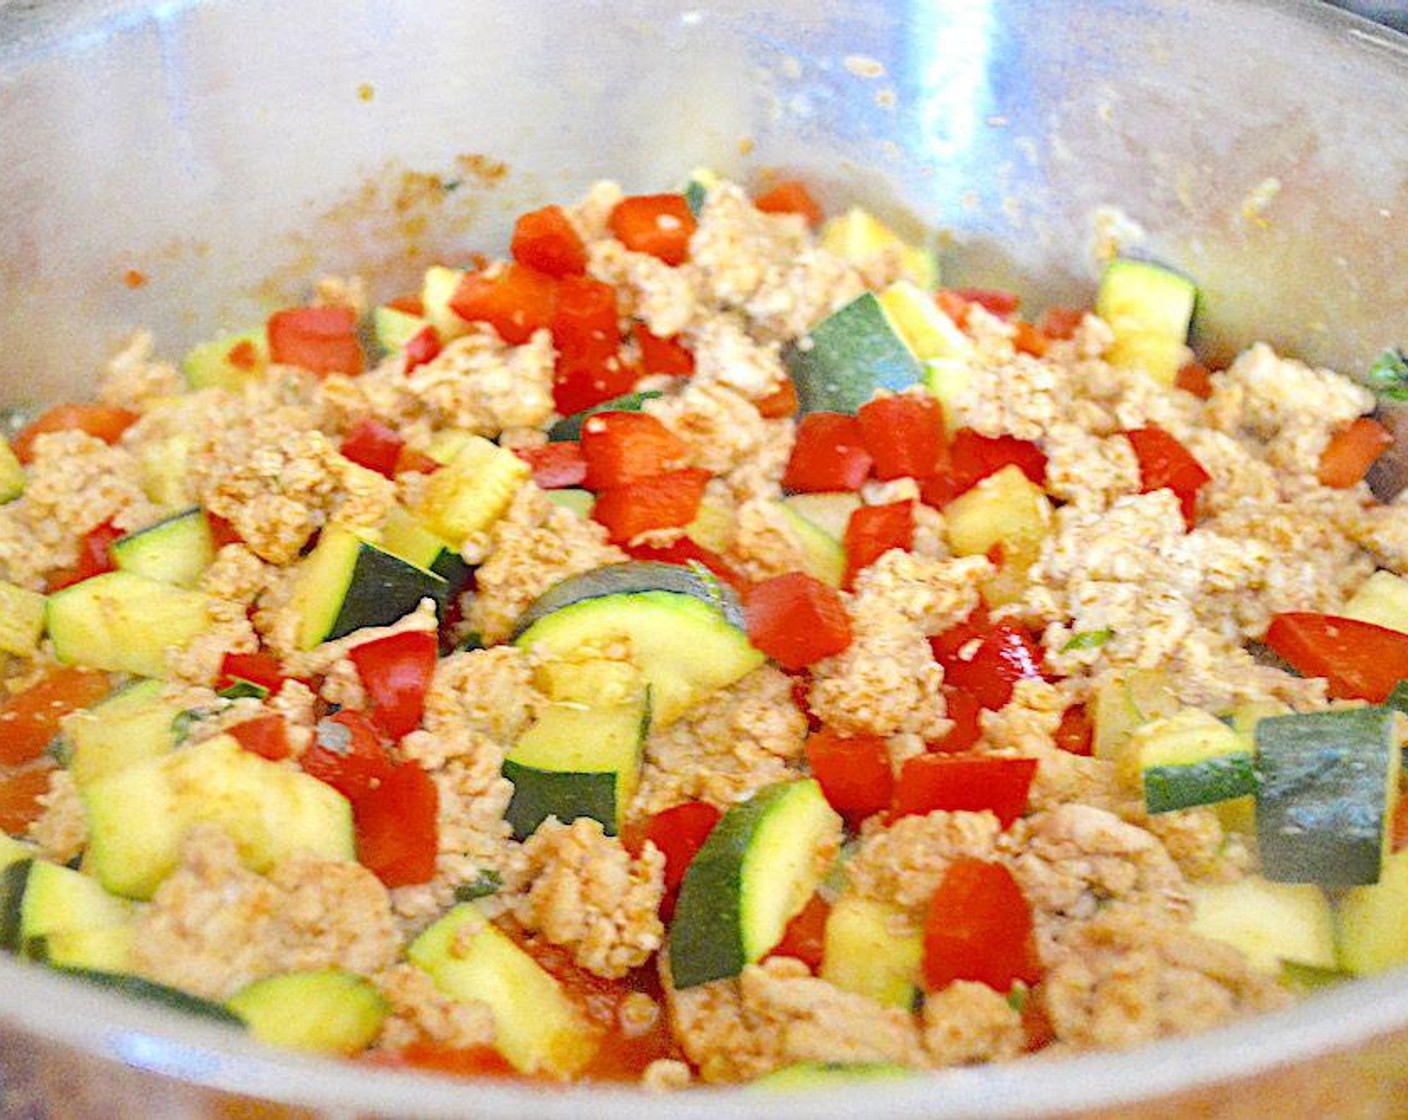 step 3 Meanwhile, make the filling. Heat more Olive Oil (as needed) in a large skillet over medium-high heat. Add in the Ground Chicken (1 lb) and break it up as you cook it through. Once it is pretty cooked through, add the Red Bell Pepper (1), Zucchini (1), Fresh Parsley (1 tsp), Low Sodium Taco Seasoning (2 Tbsp) and Lemon (1).